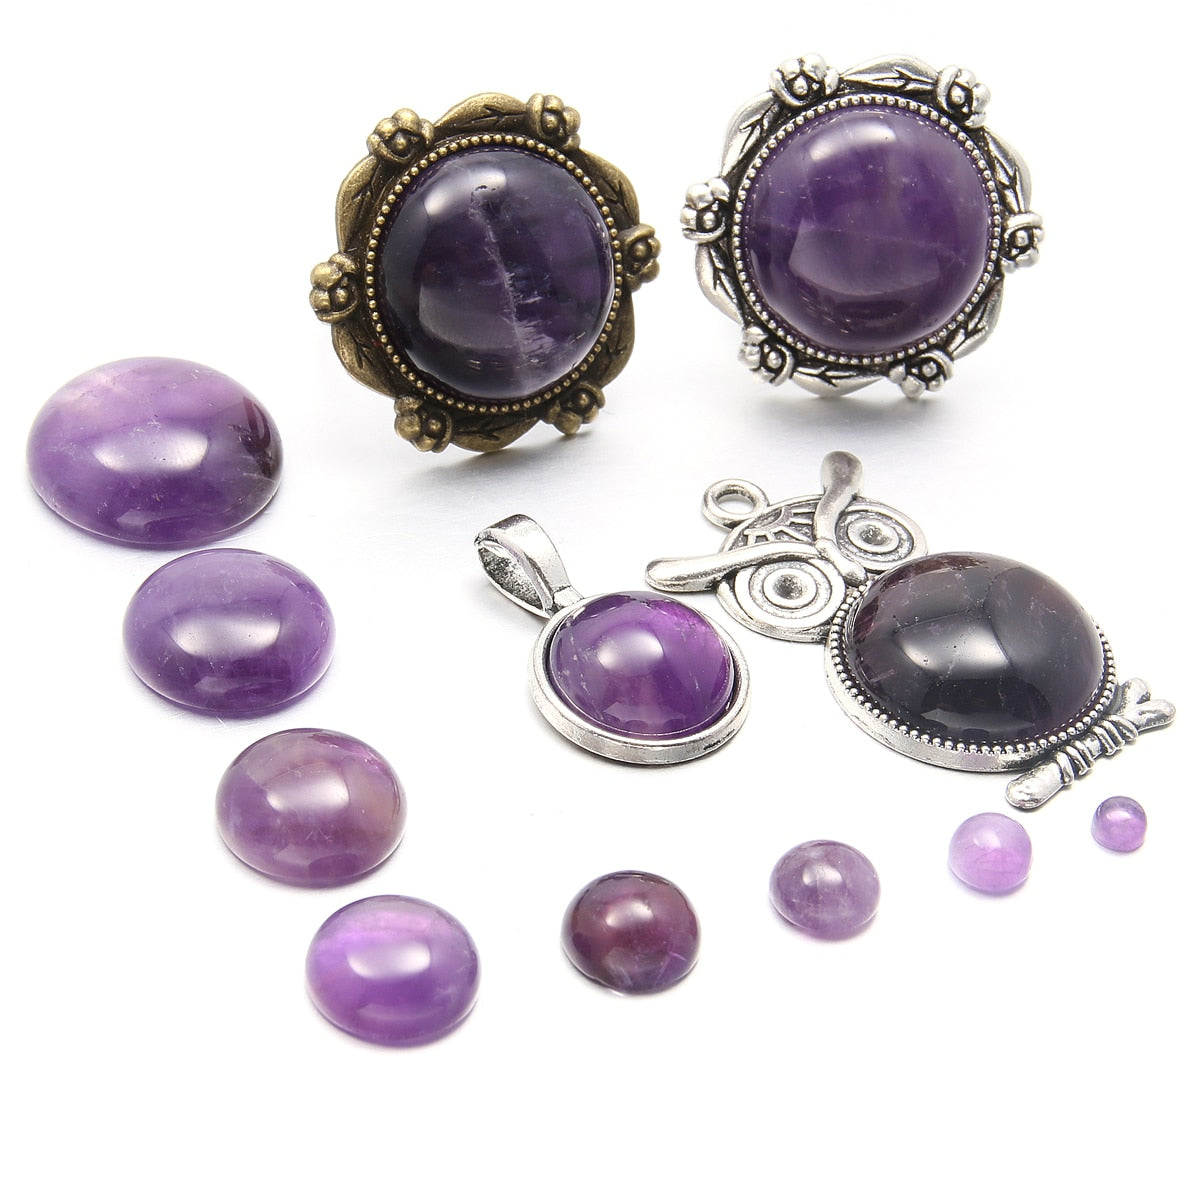 Natural Stones Amethyst Cabochon 8 10 12 14 16 18 20 mm Round No Hole Beads for Making Jewelry DIY accessories Loose Beads